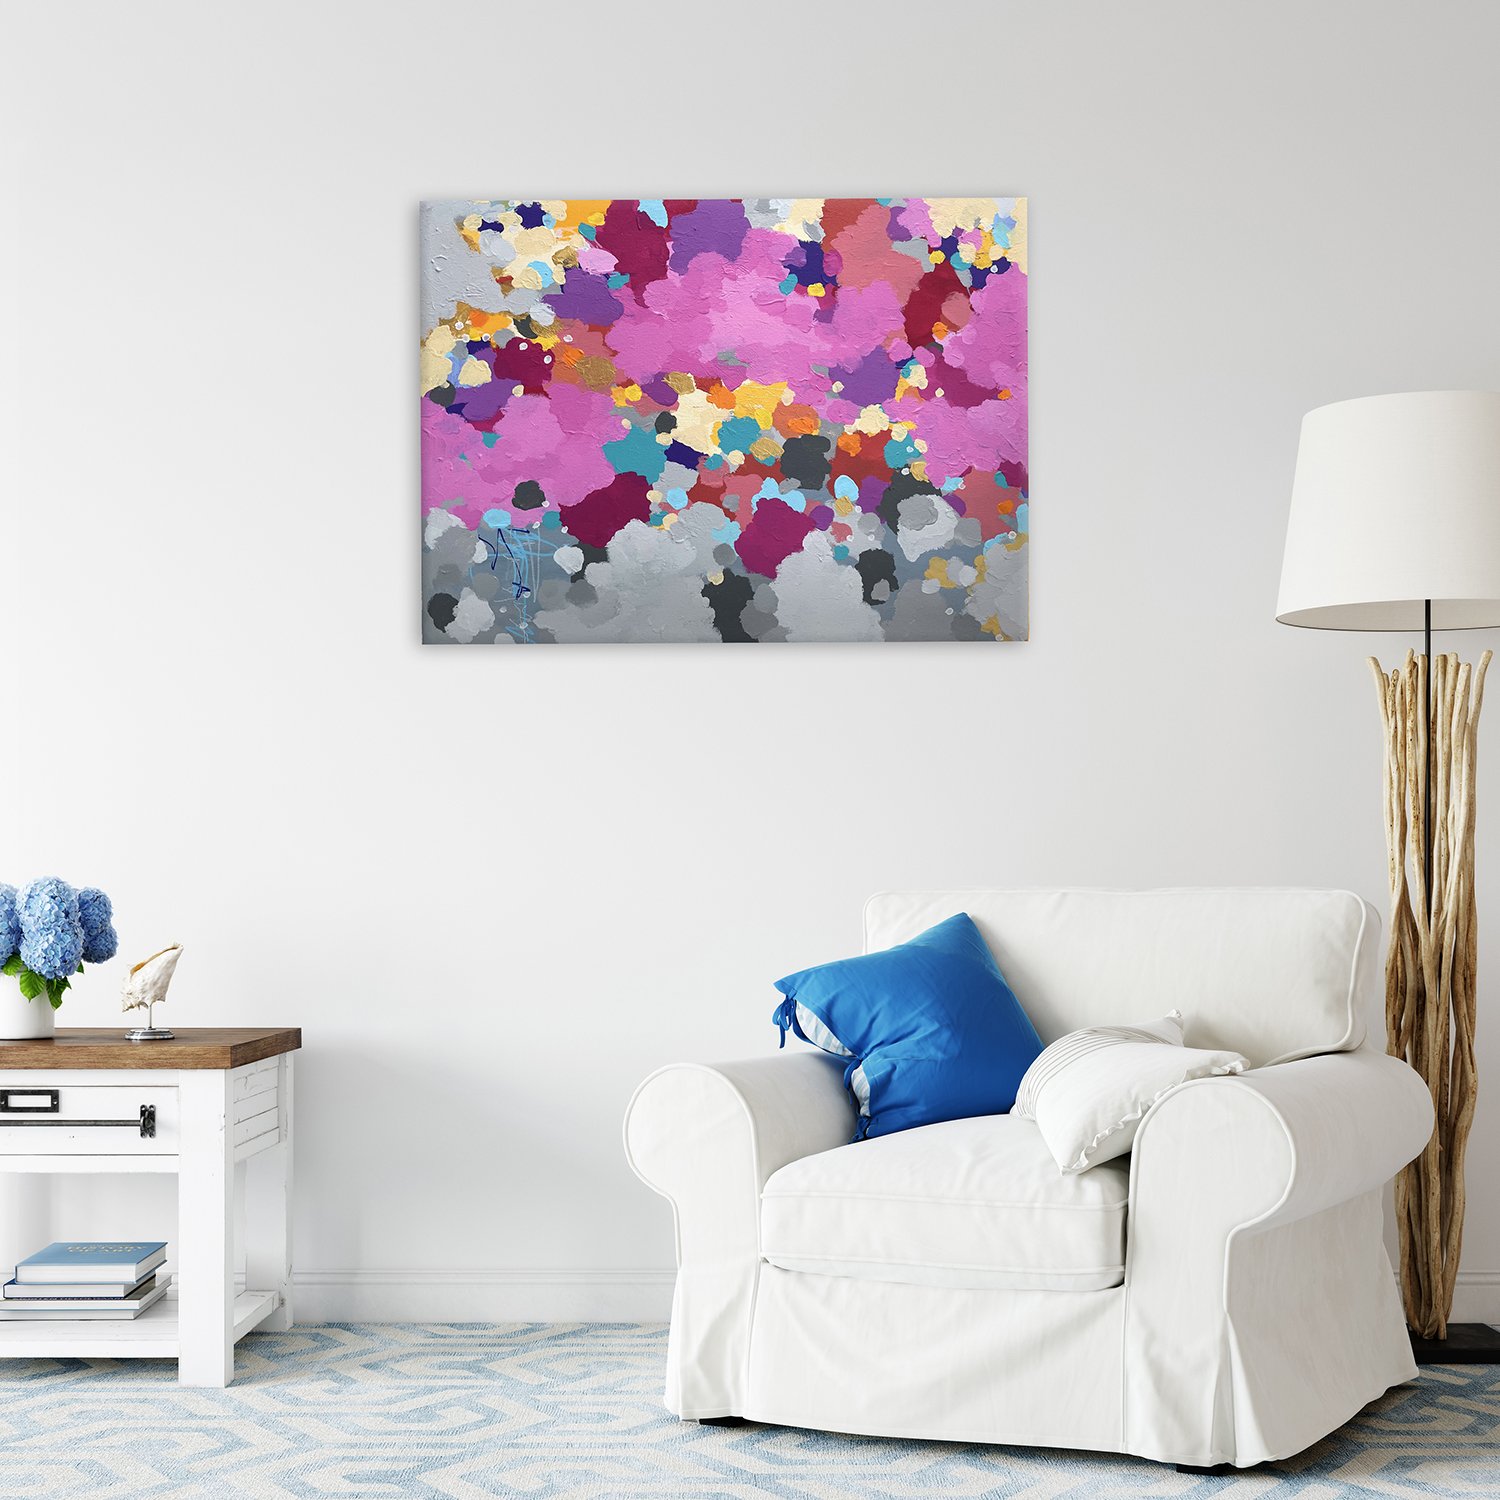 Shop Floral & Abstract Paintings — Stacy Lee Art